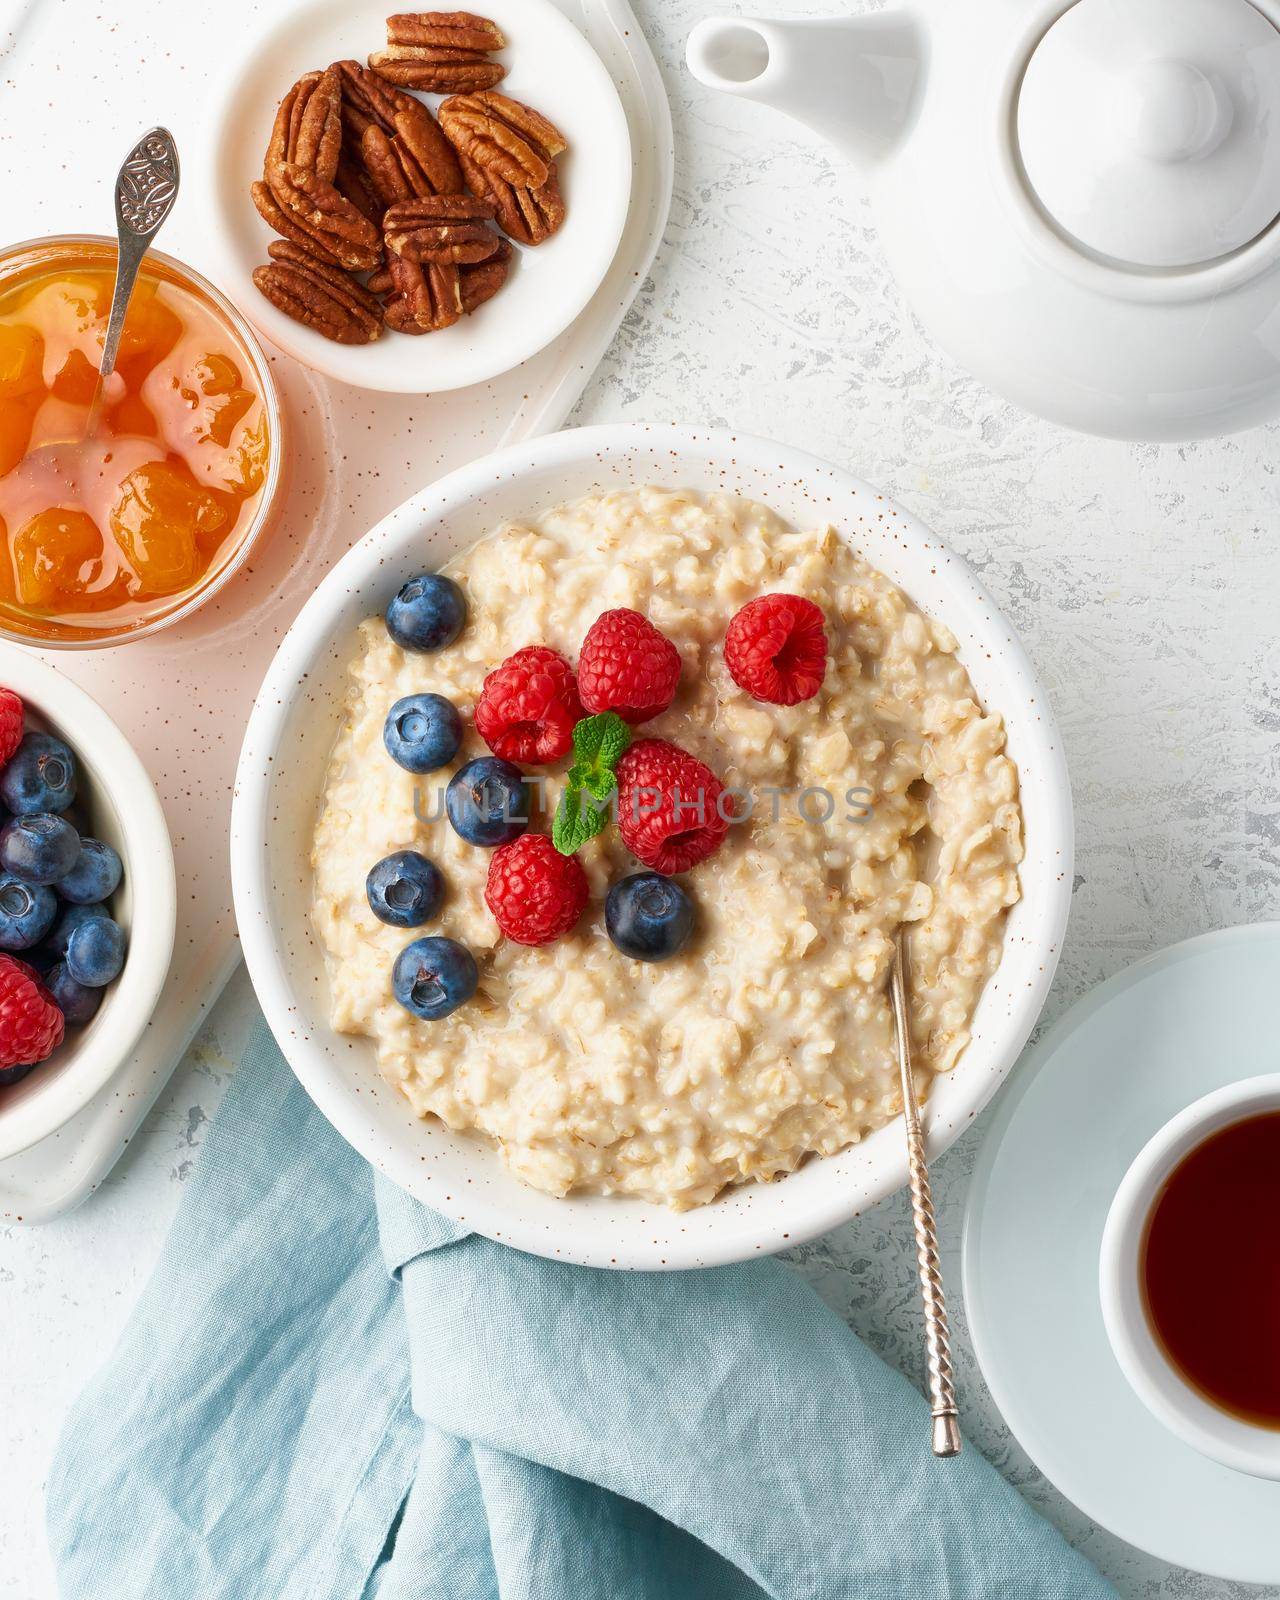 Oatmeal porridge with blueberry, raspberries, jam and nuts in white bowl, dash diet with berries, white background, side view, vertical. Healthy diet breakfast